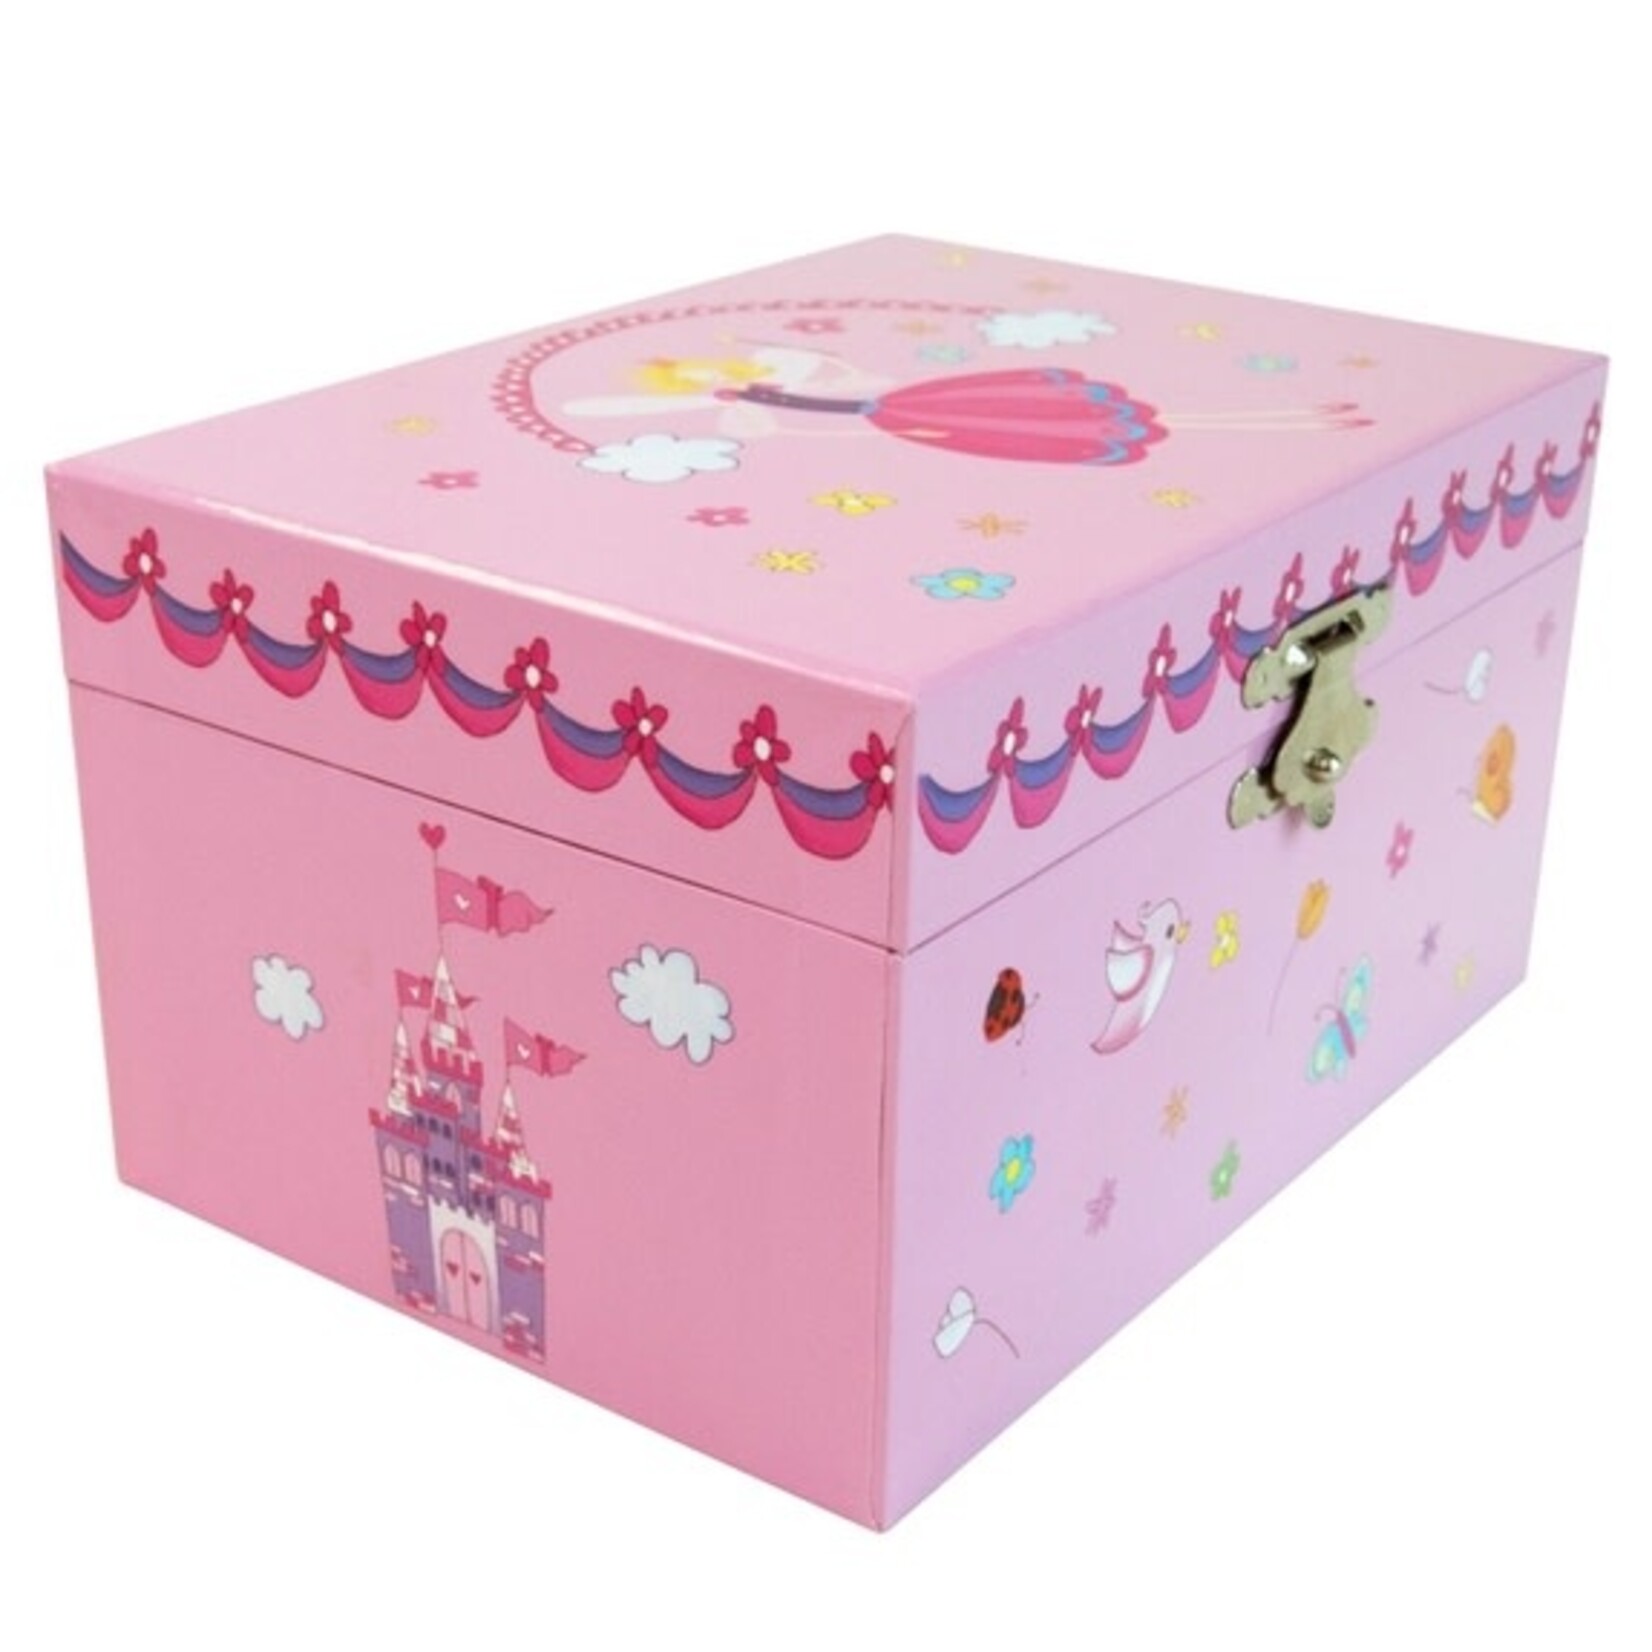 Mele and Co Mele and Co Krista Musical Fairy Jewelry Box Waltz Flowers